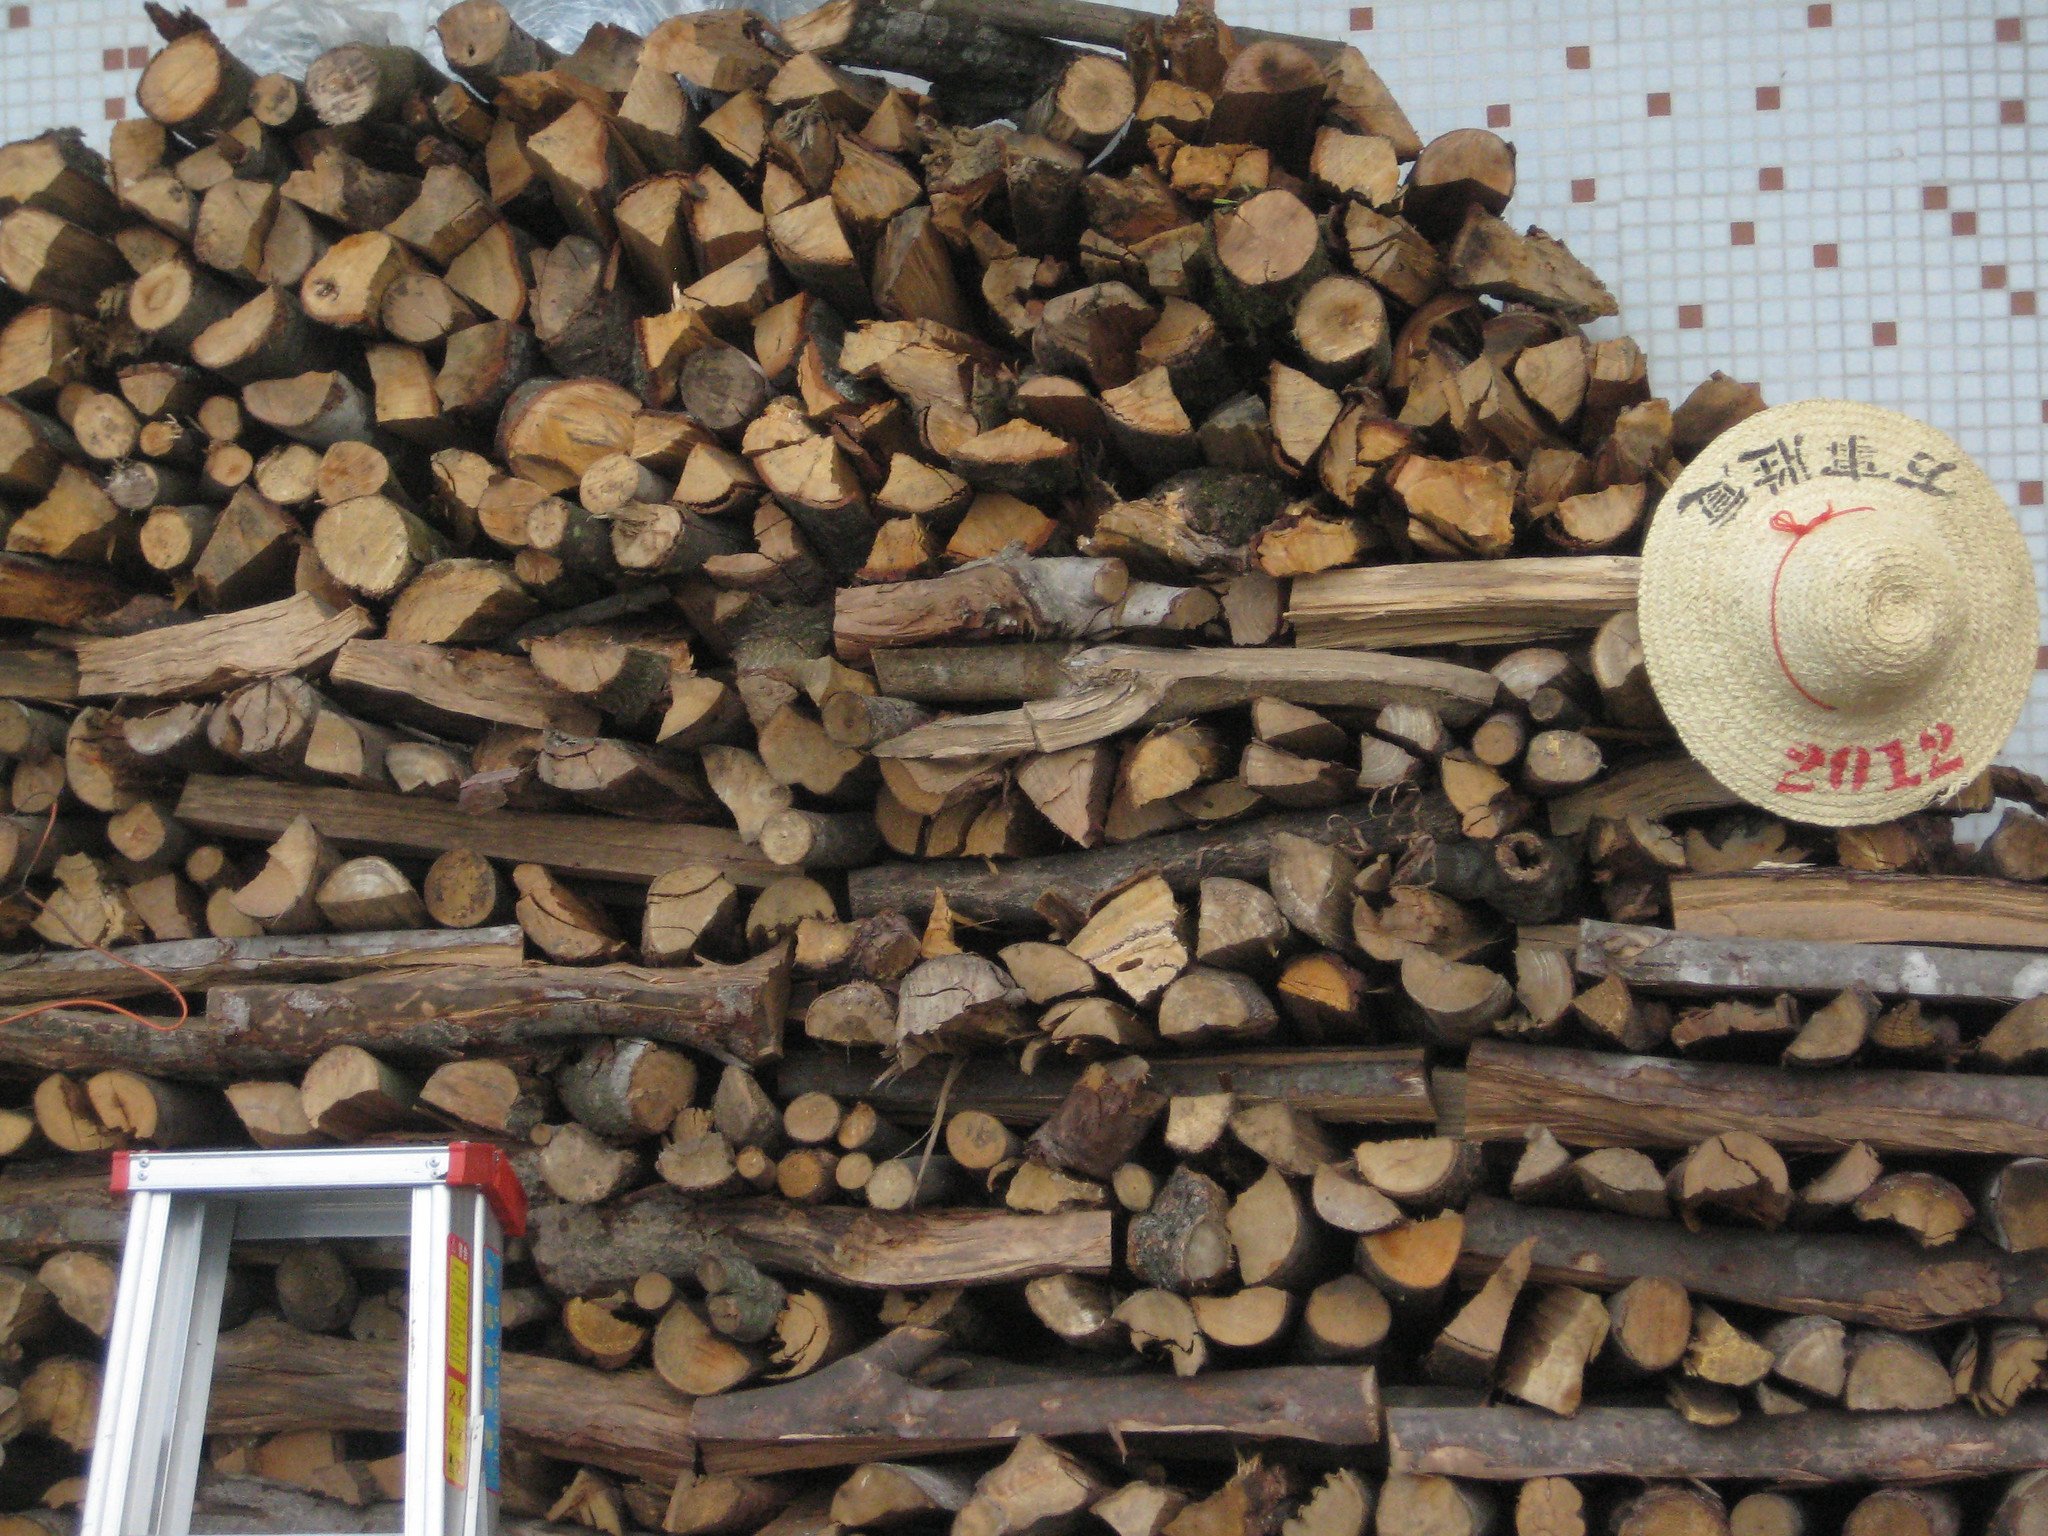 Firewood stacked outside